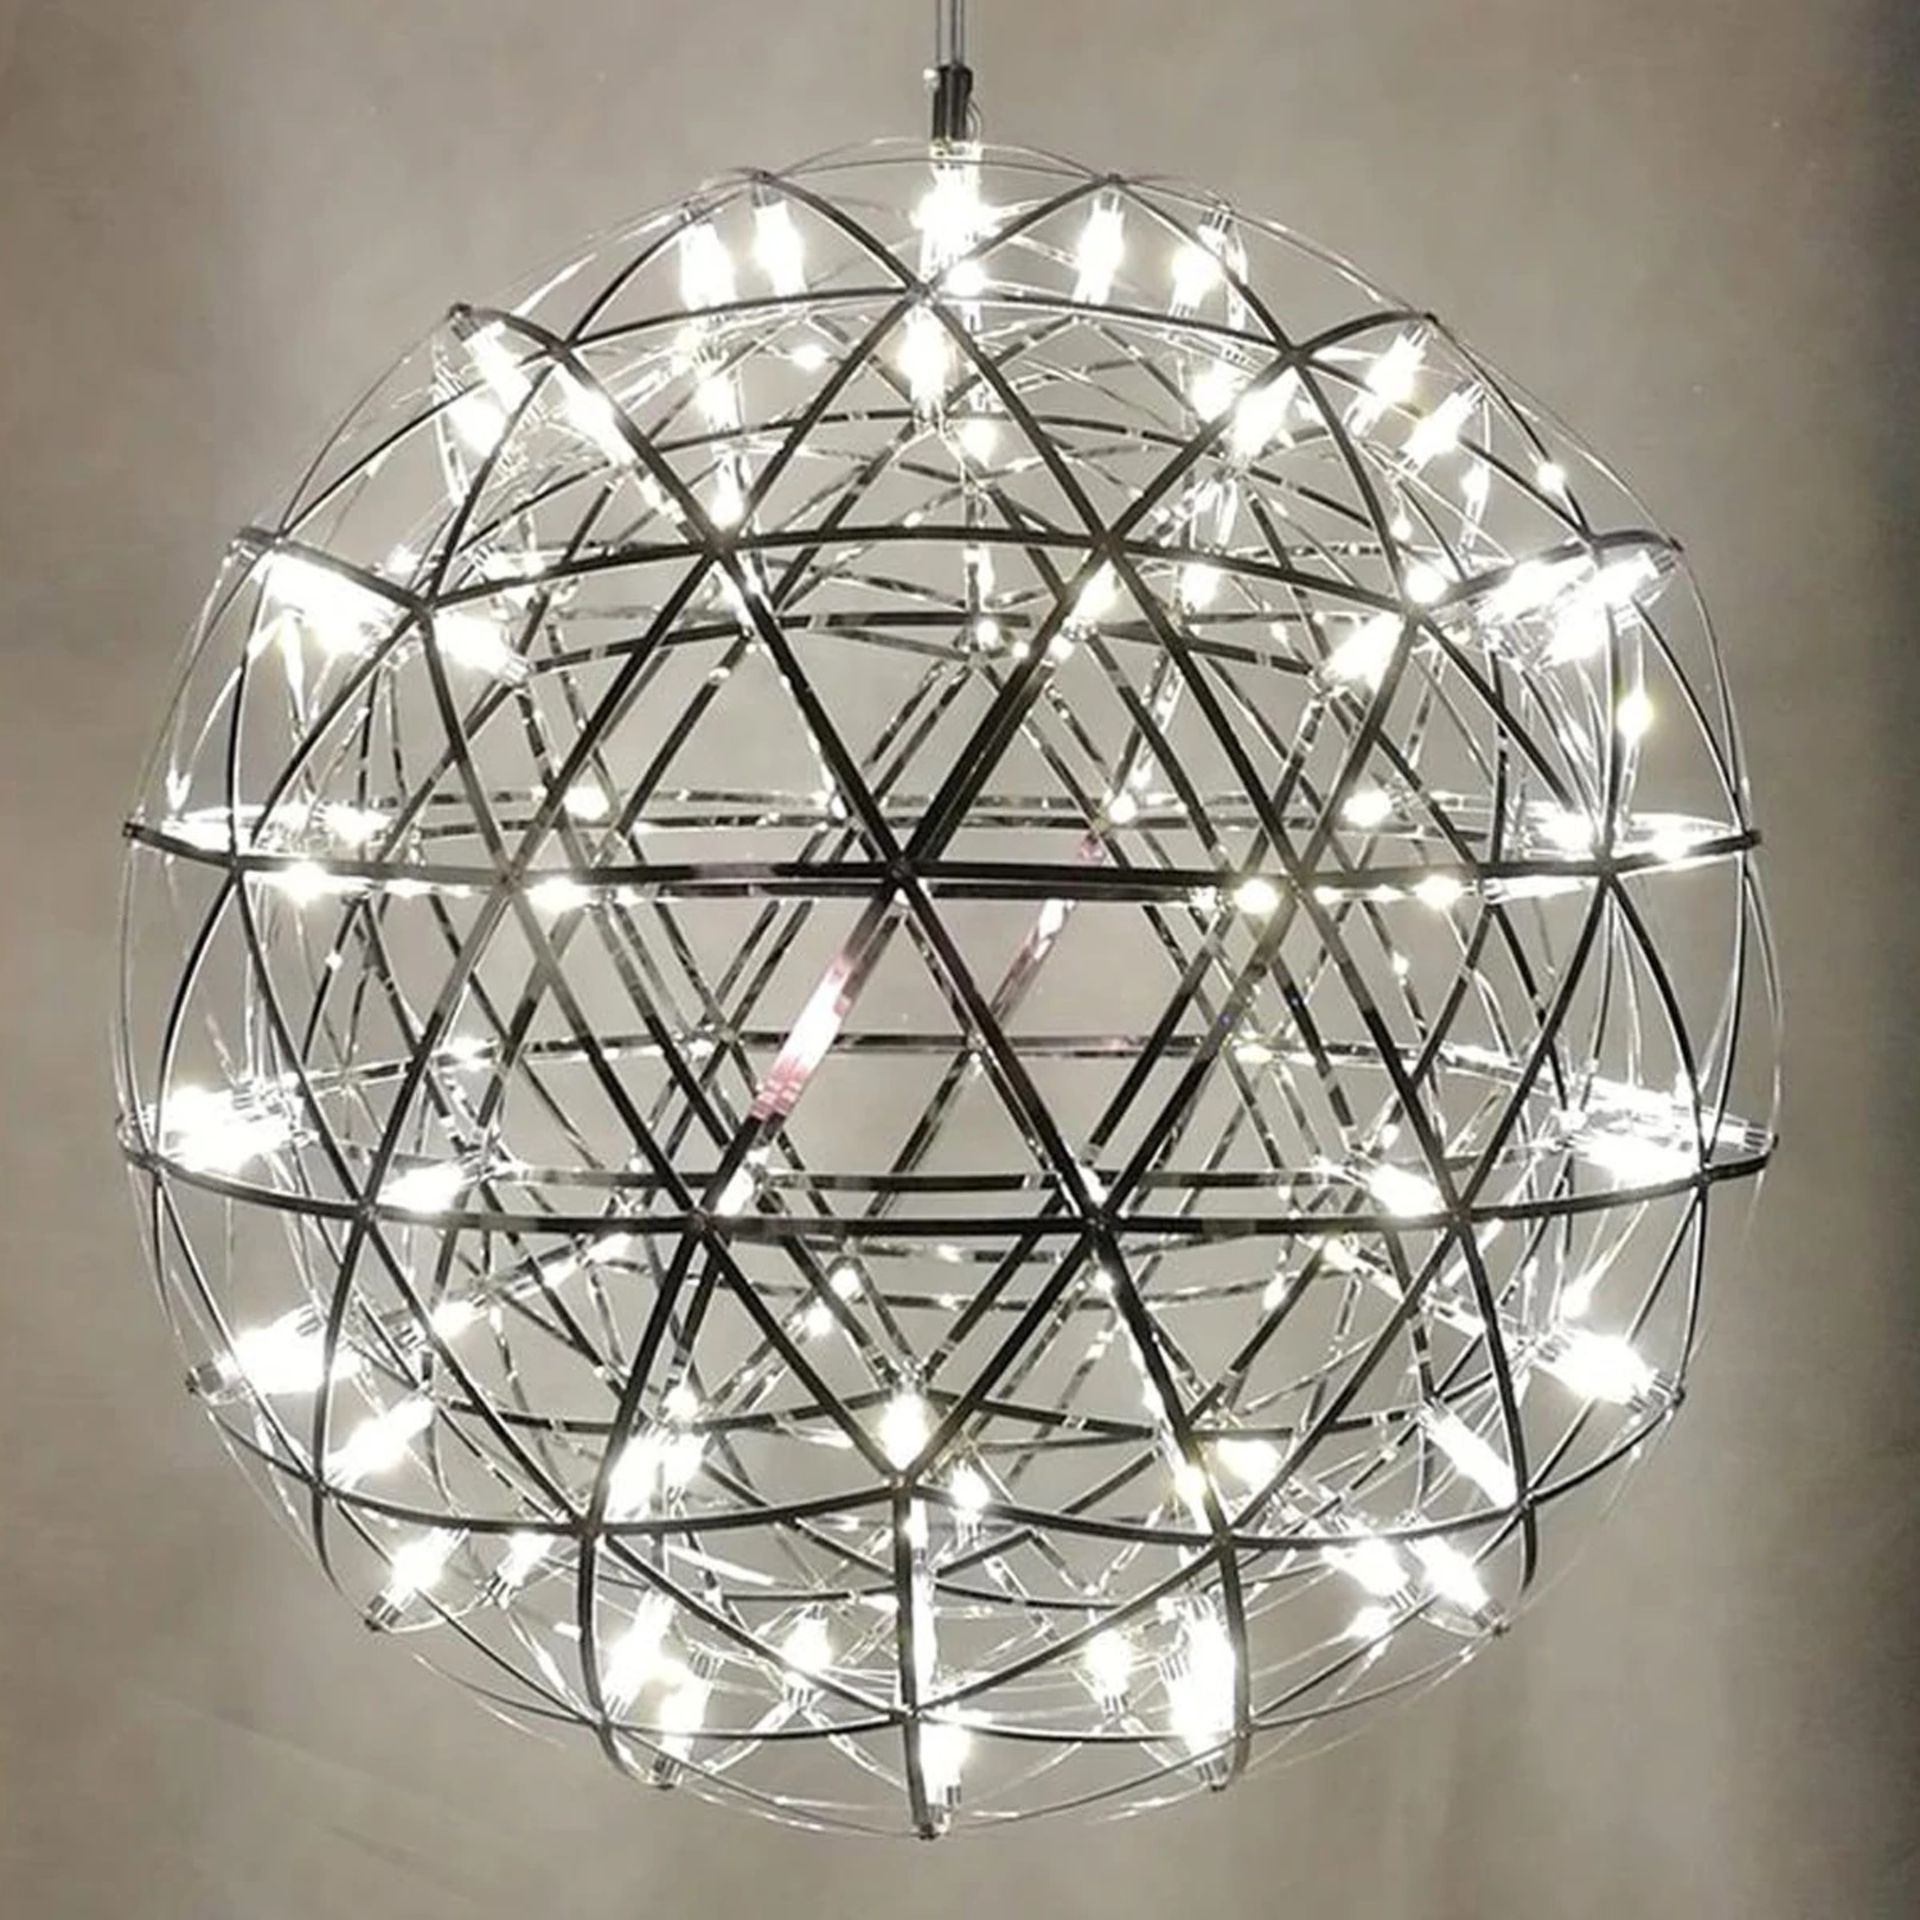 Starburst Hanging Pendant 40cm diameter x 42 lights with its chrome bodied spherical globe and - Image 2 of 3